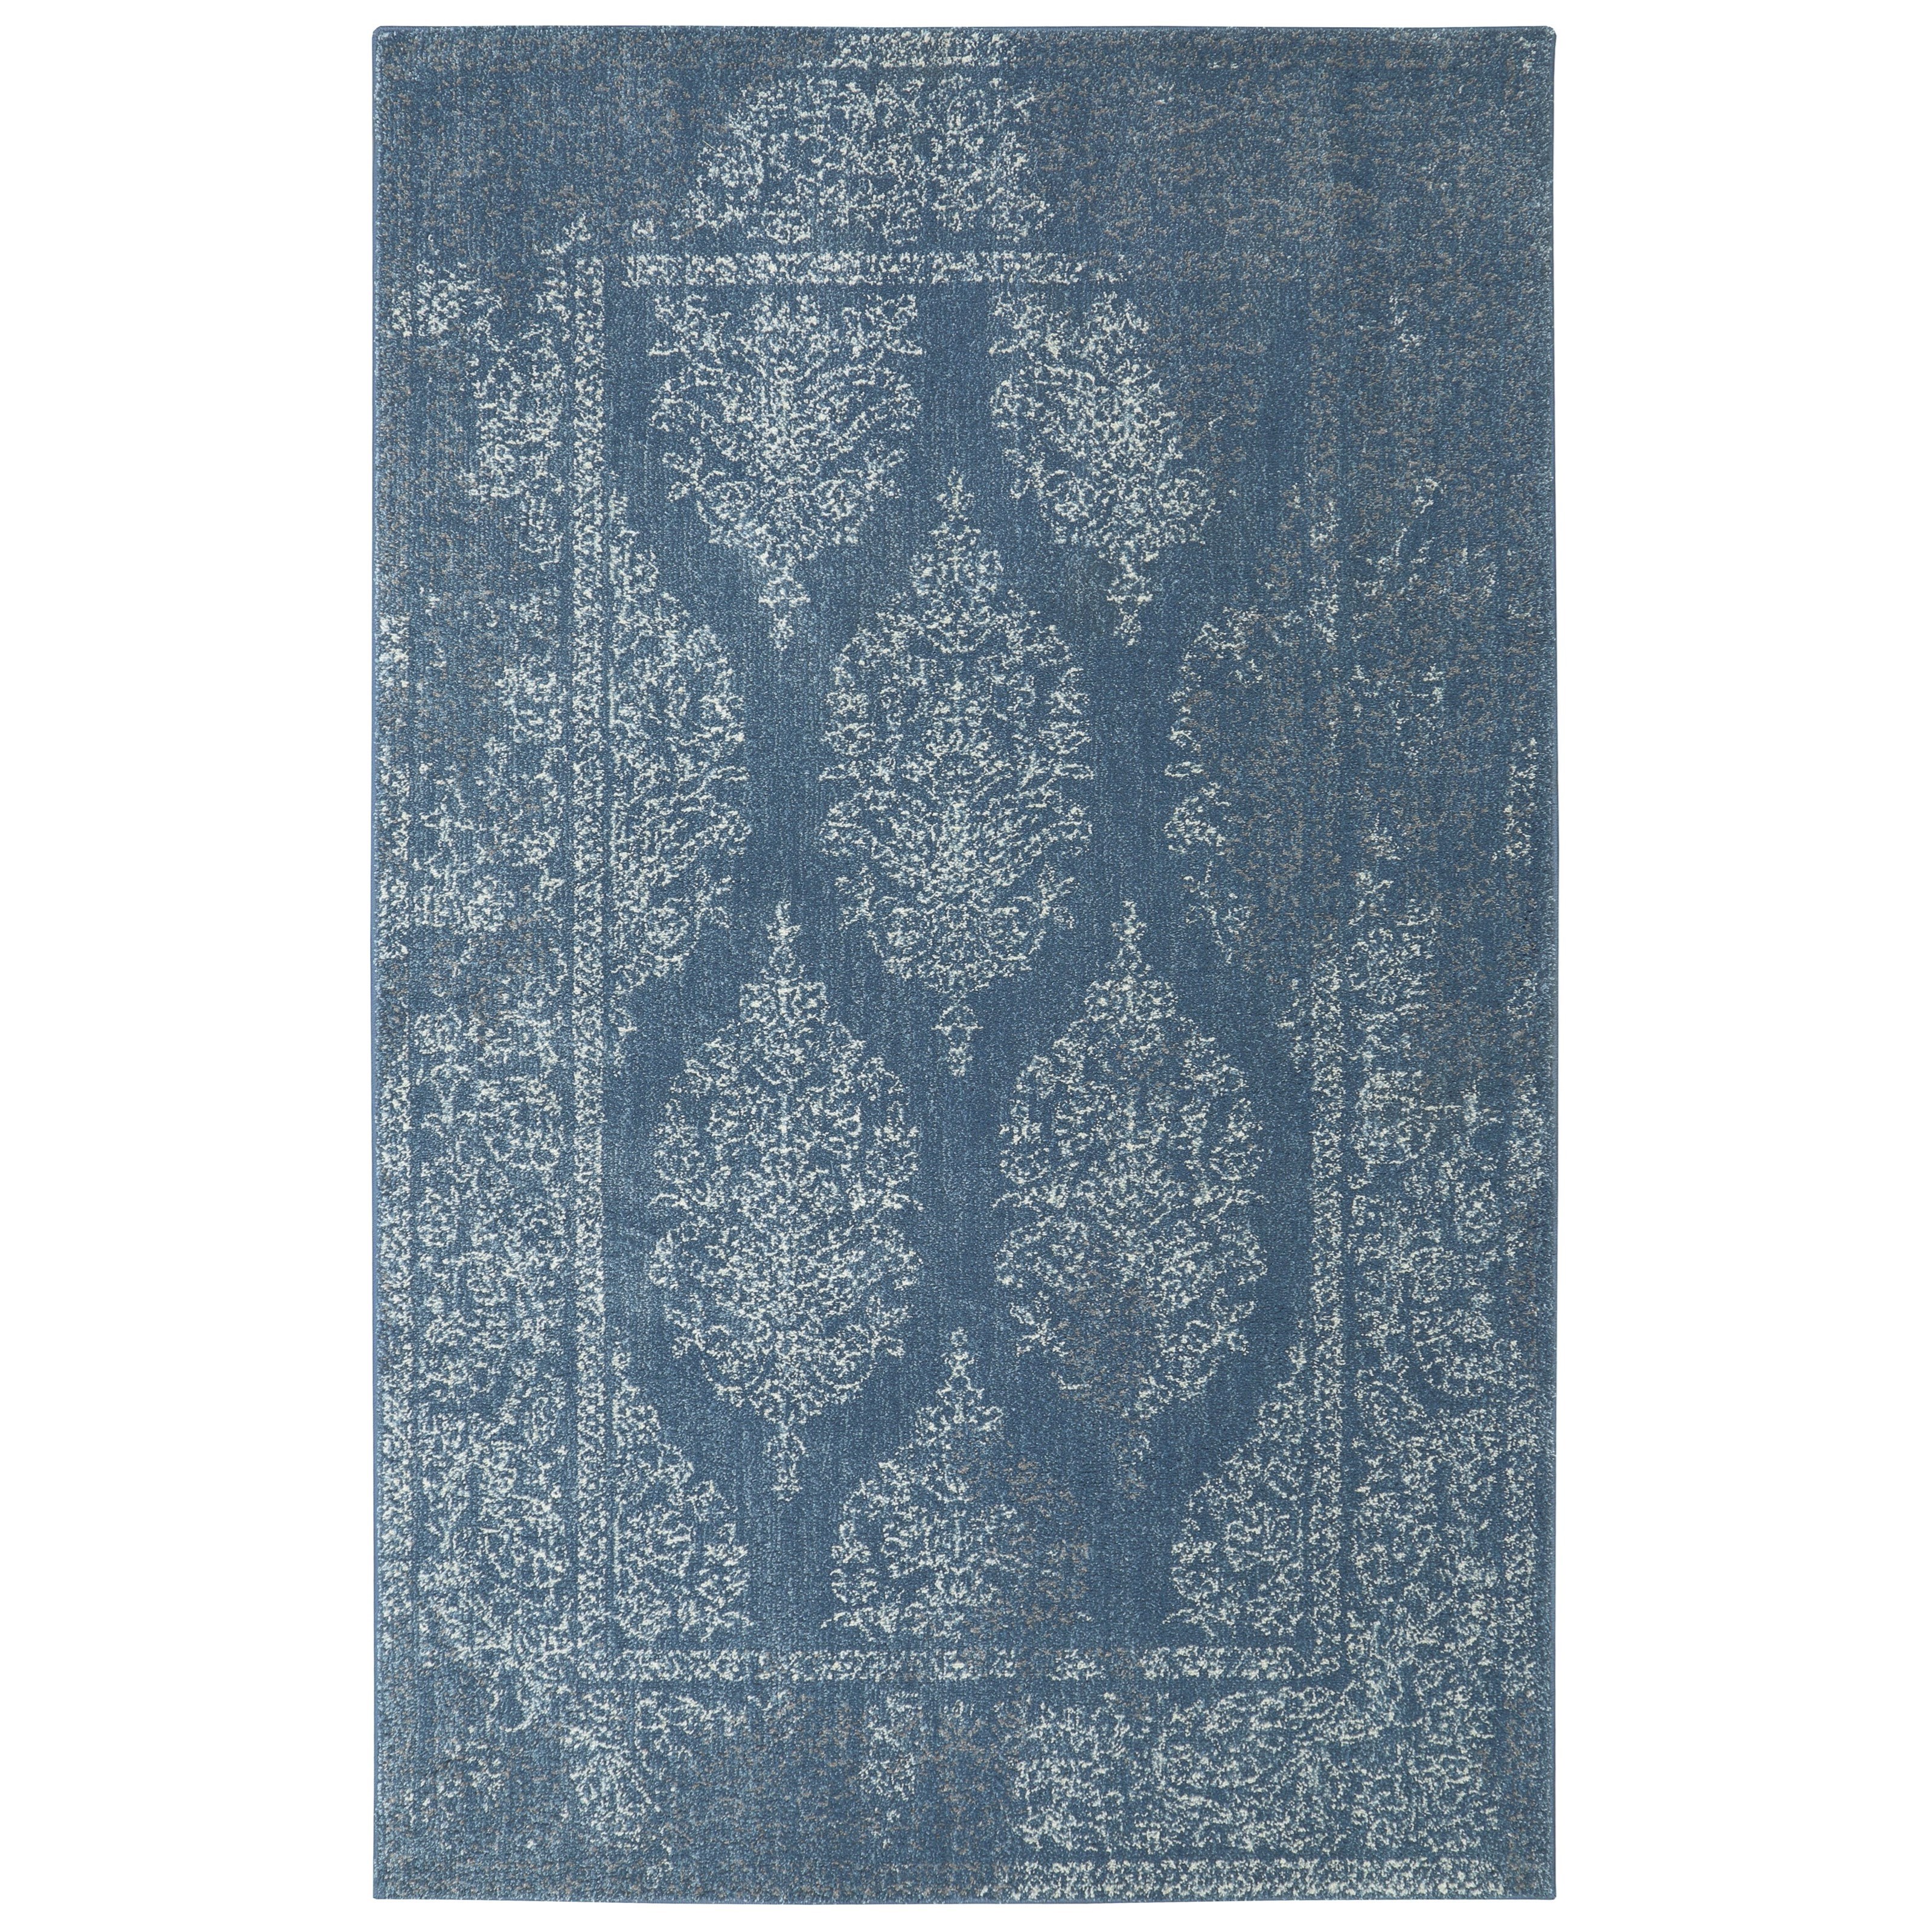 5'x8' Paxton Blue Area Rug